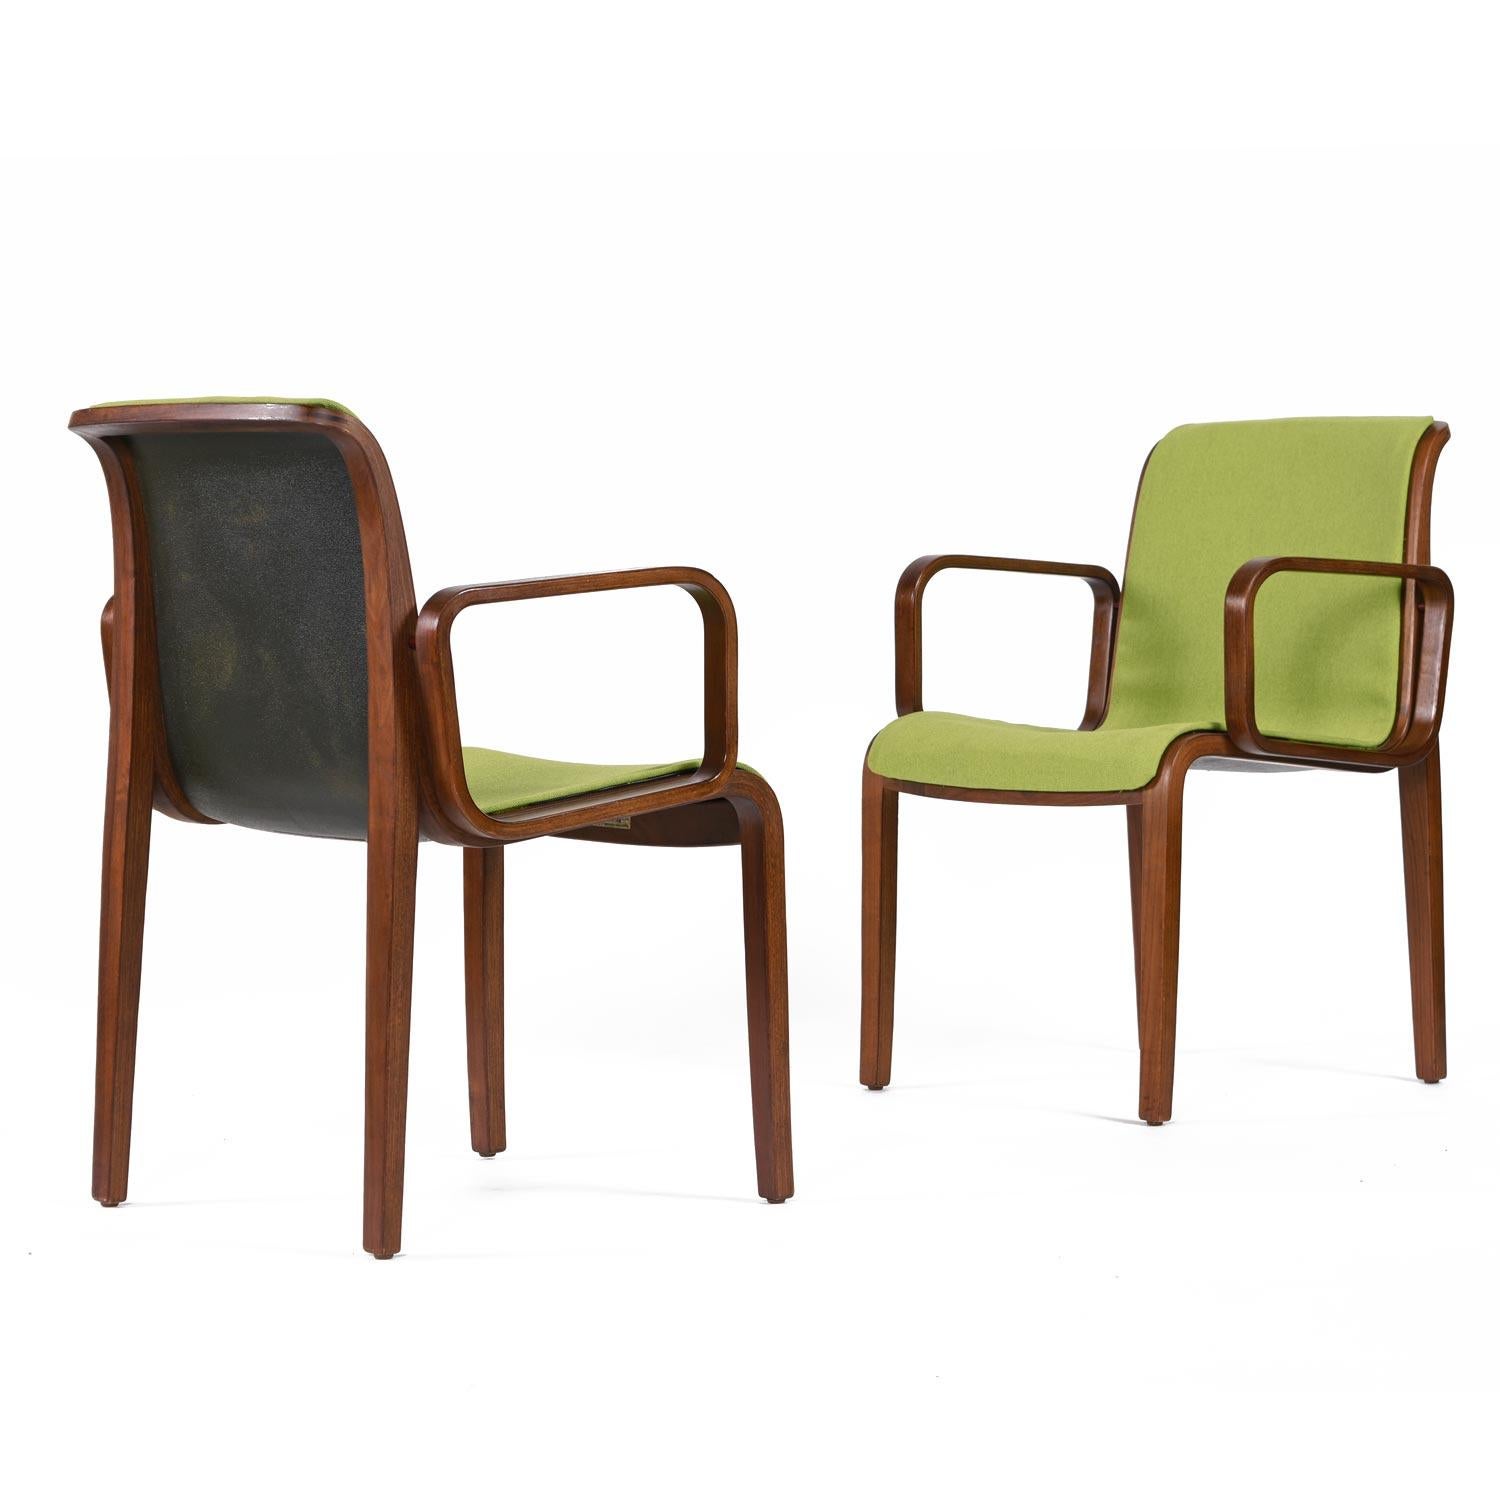 Captivating set of six Bill Stephens for Knoll 1305-U armchairs. The Post-Modern armchairs build upon the technology pioneered by Thonet. The bent wood is layers of steamed strips of teak wood bent, and laminated, over a form to create one solid